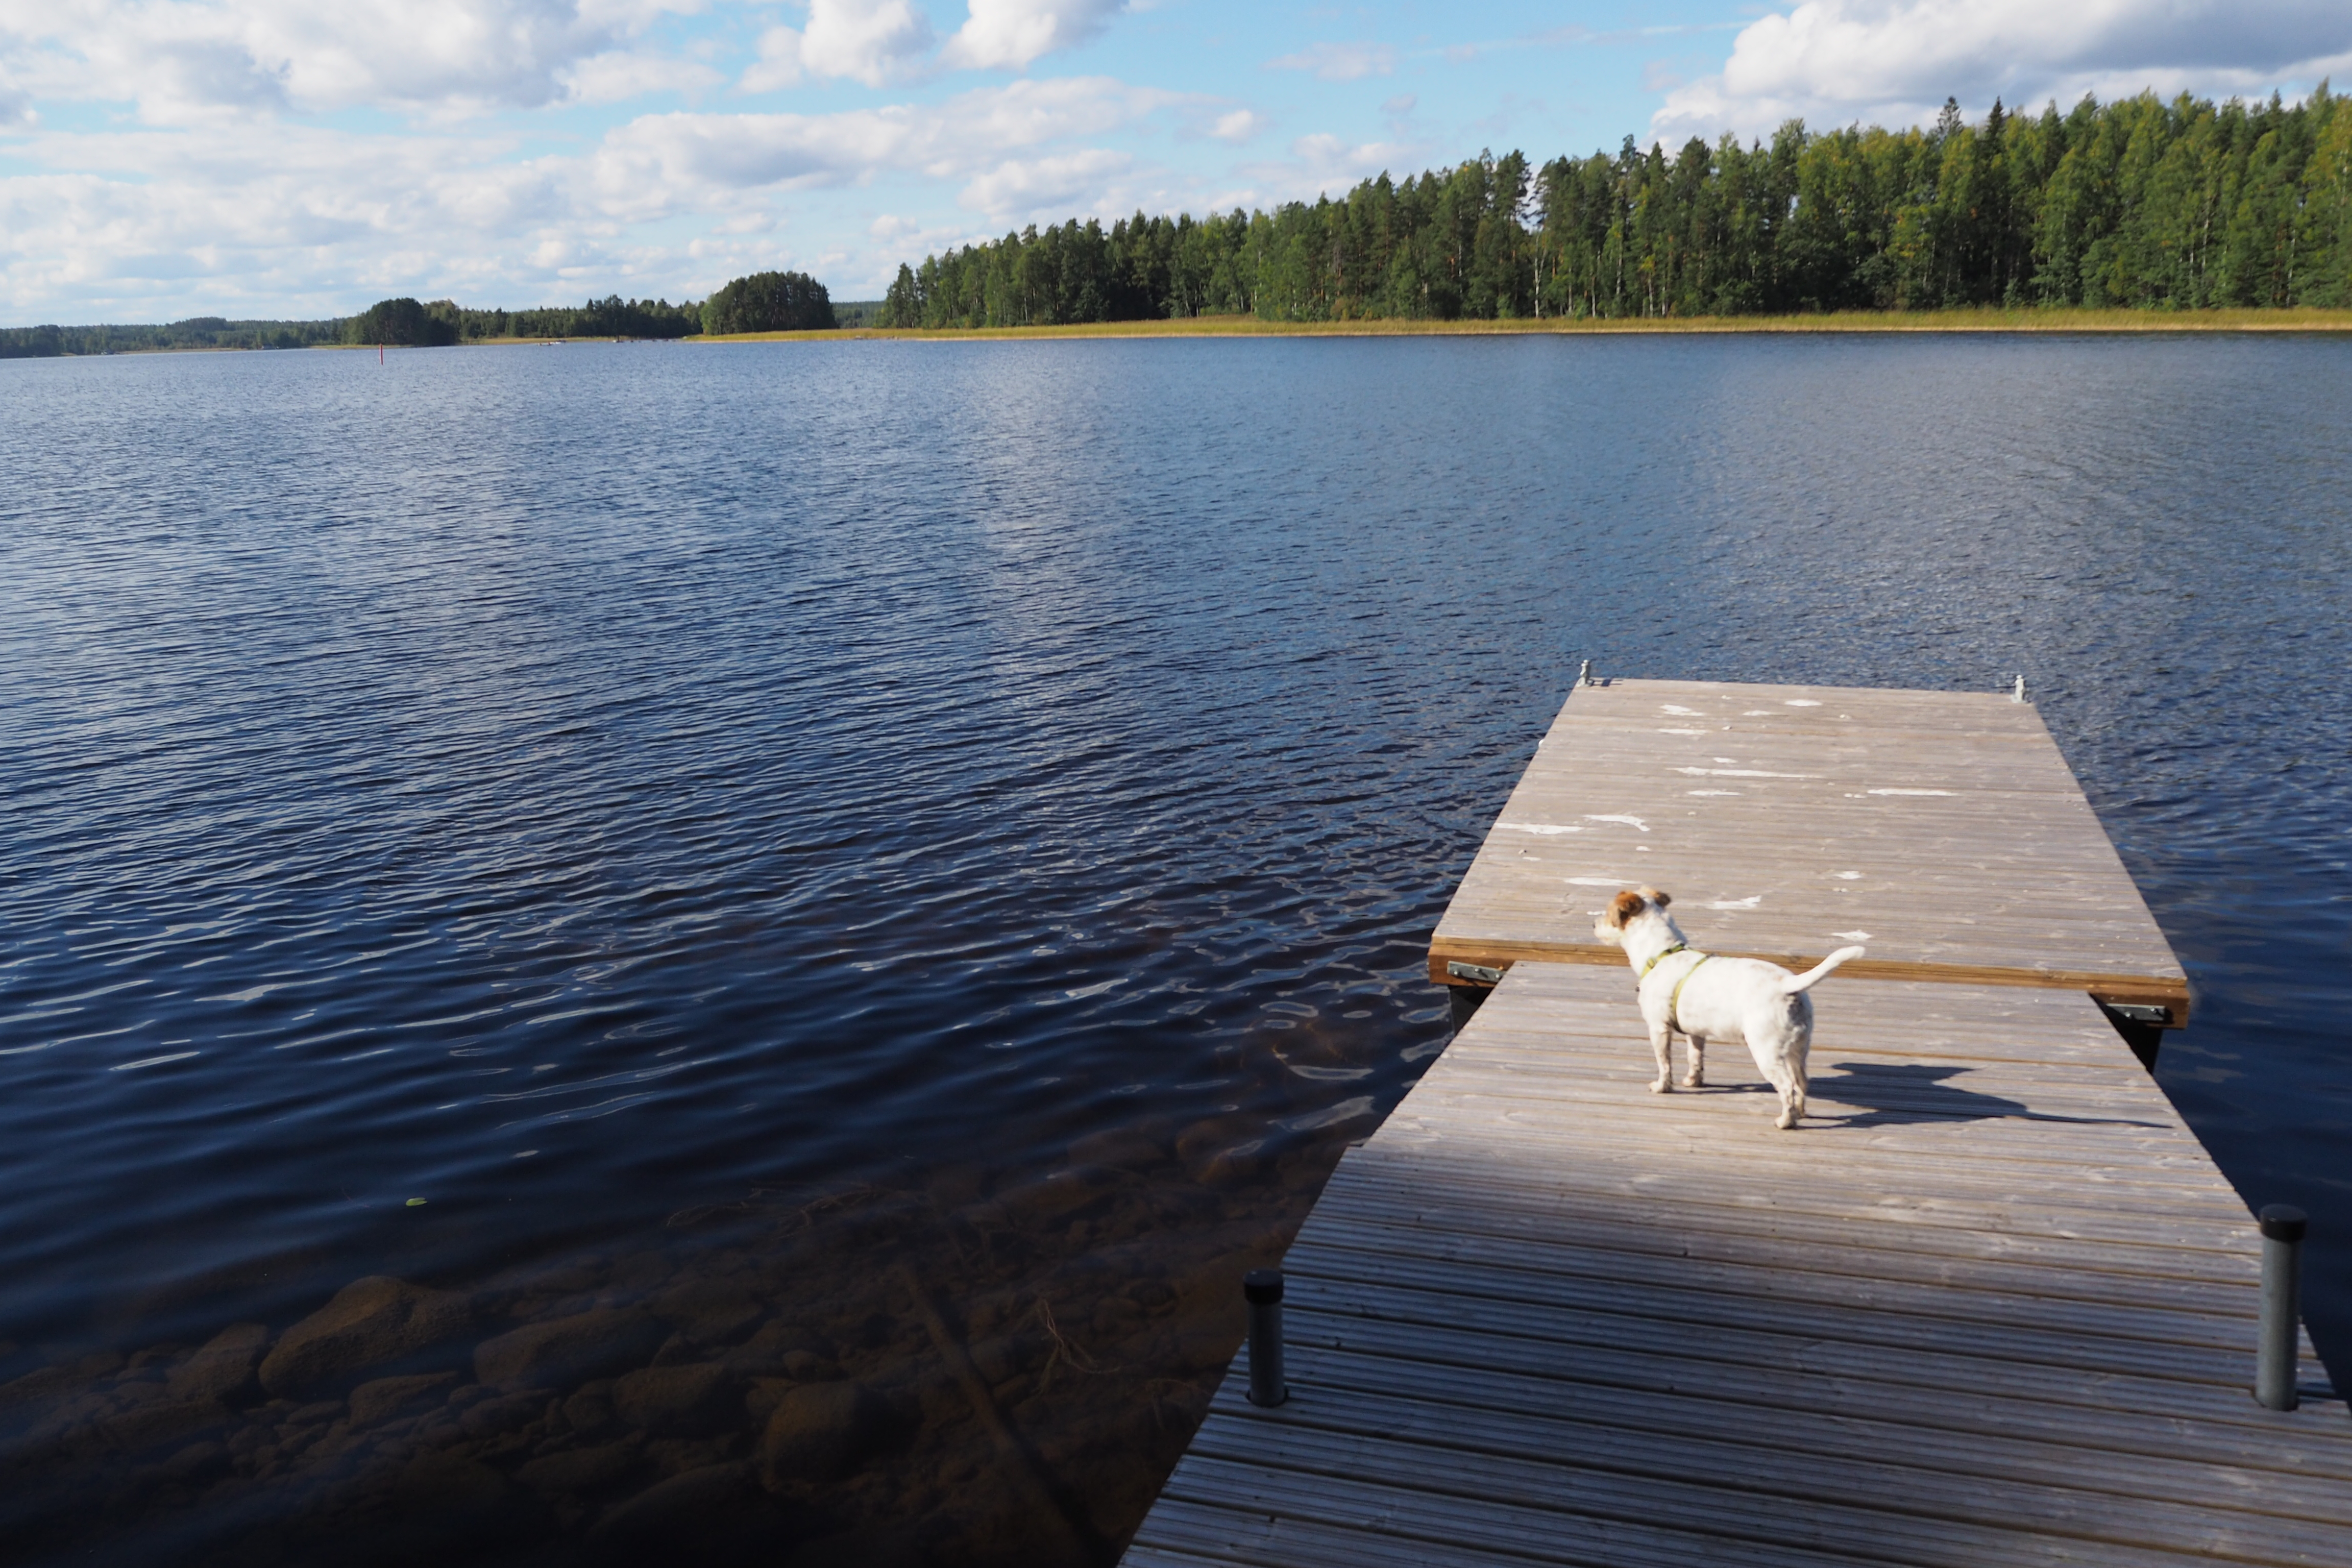 A dog on the dock